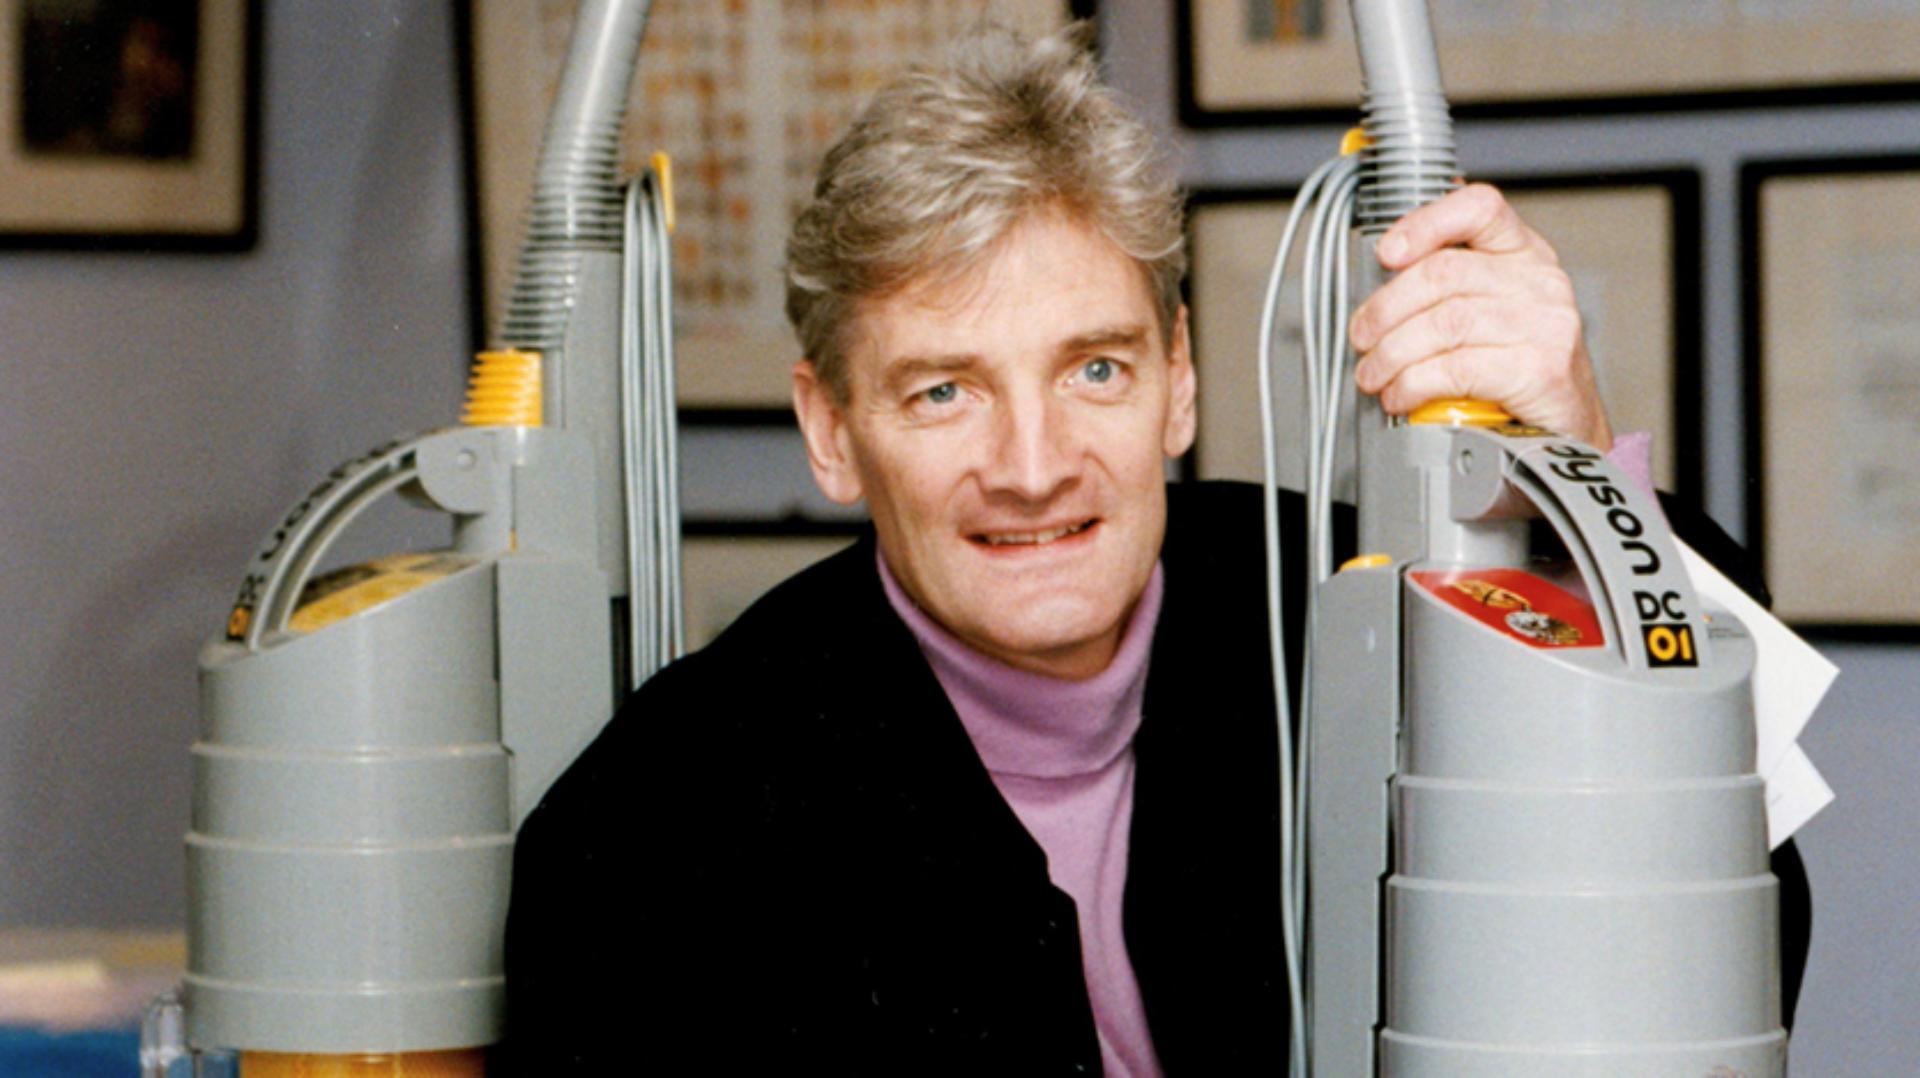 James Dyson pictured with two DC01s